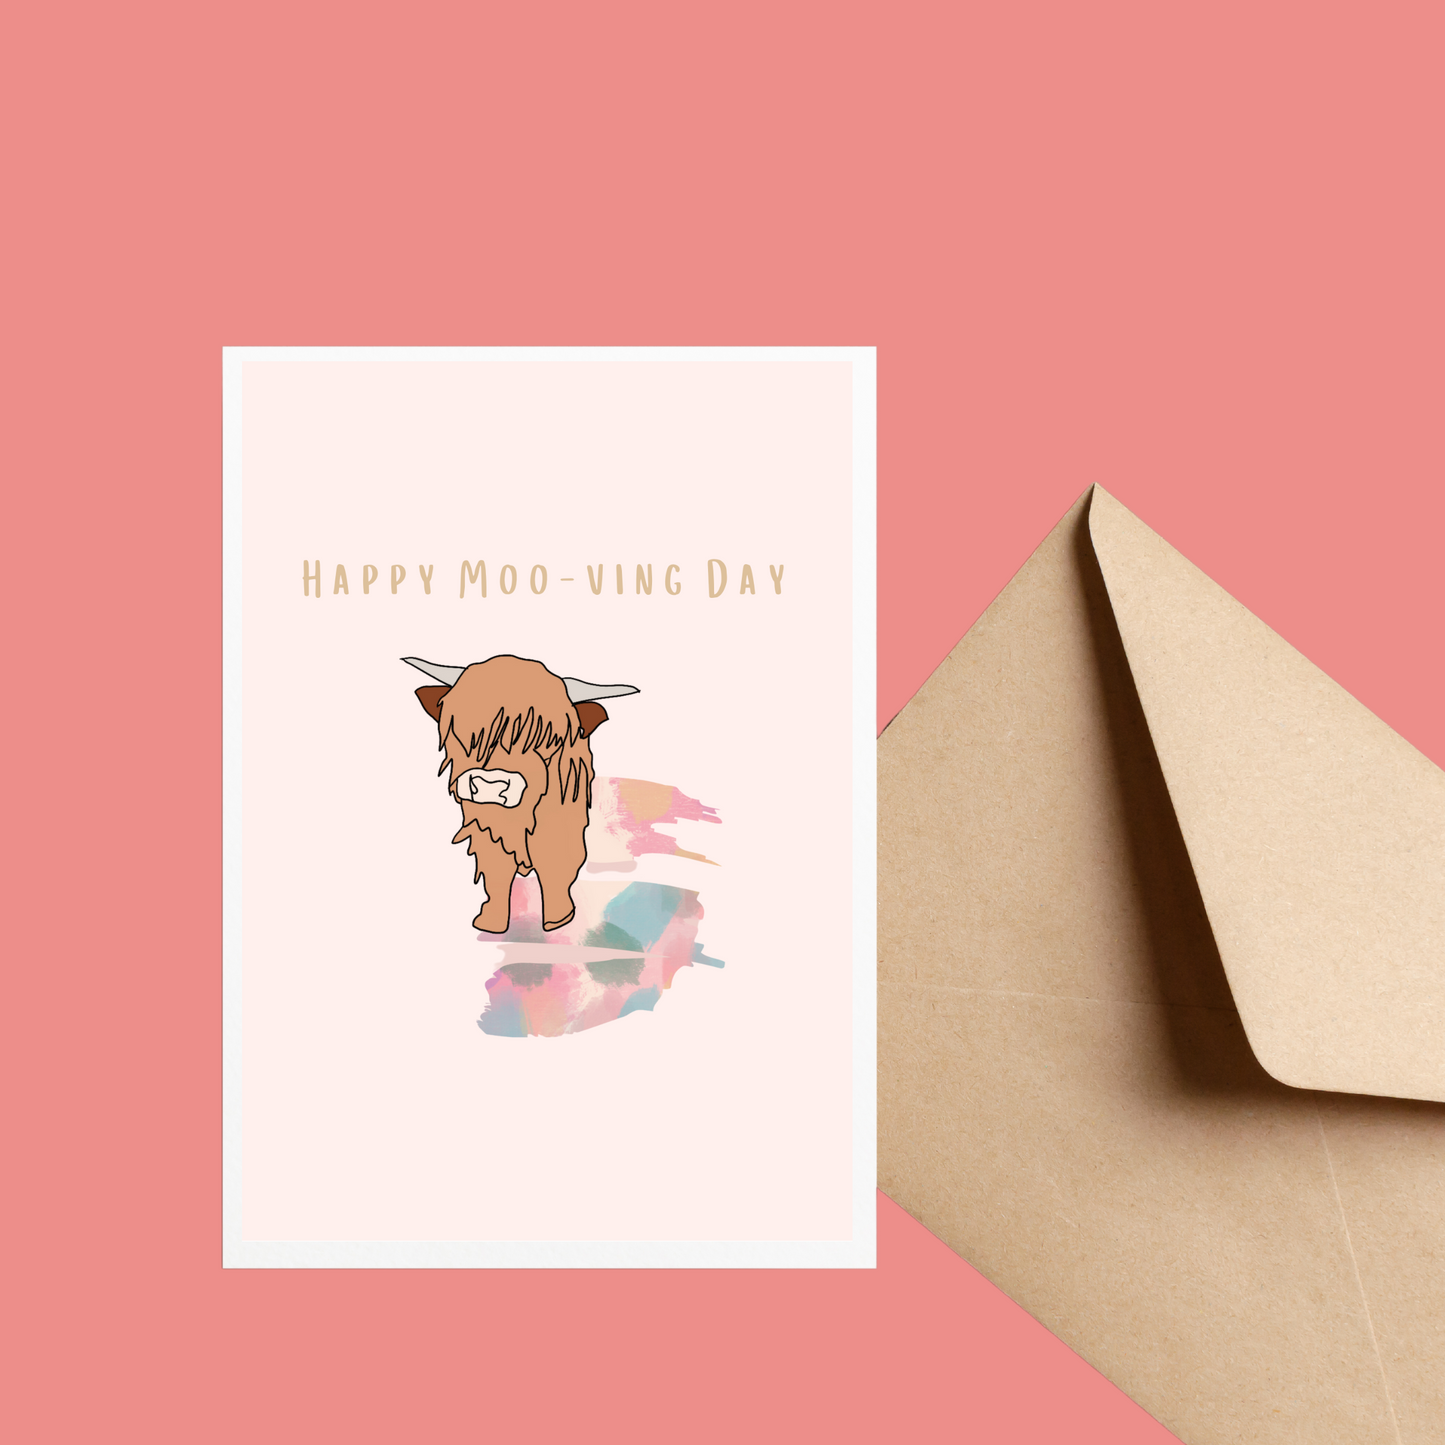 Happy Mooving Day Greeting Card